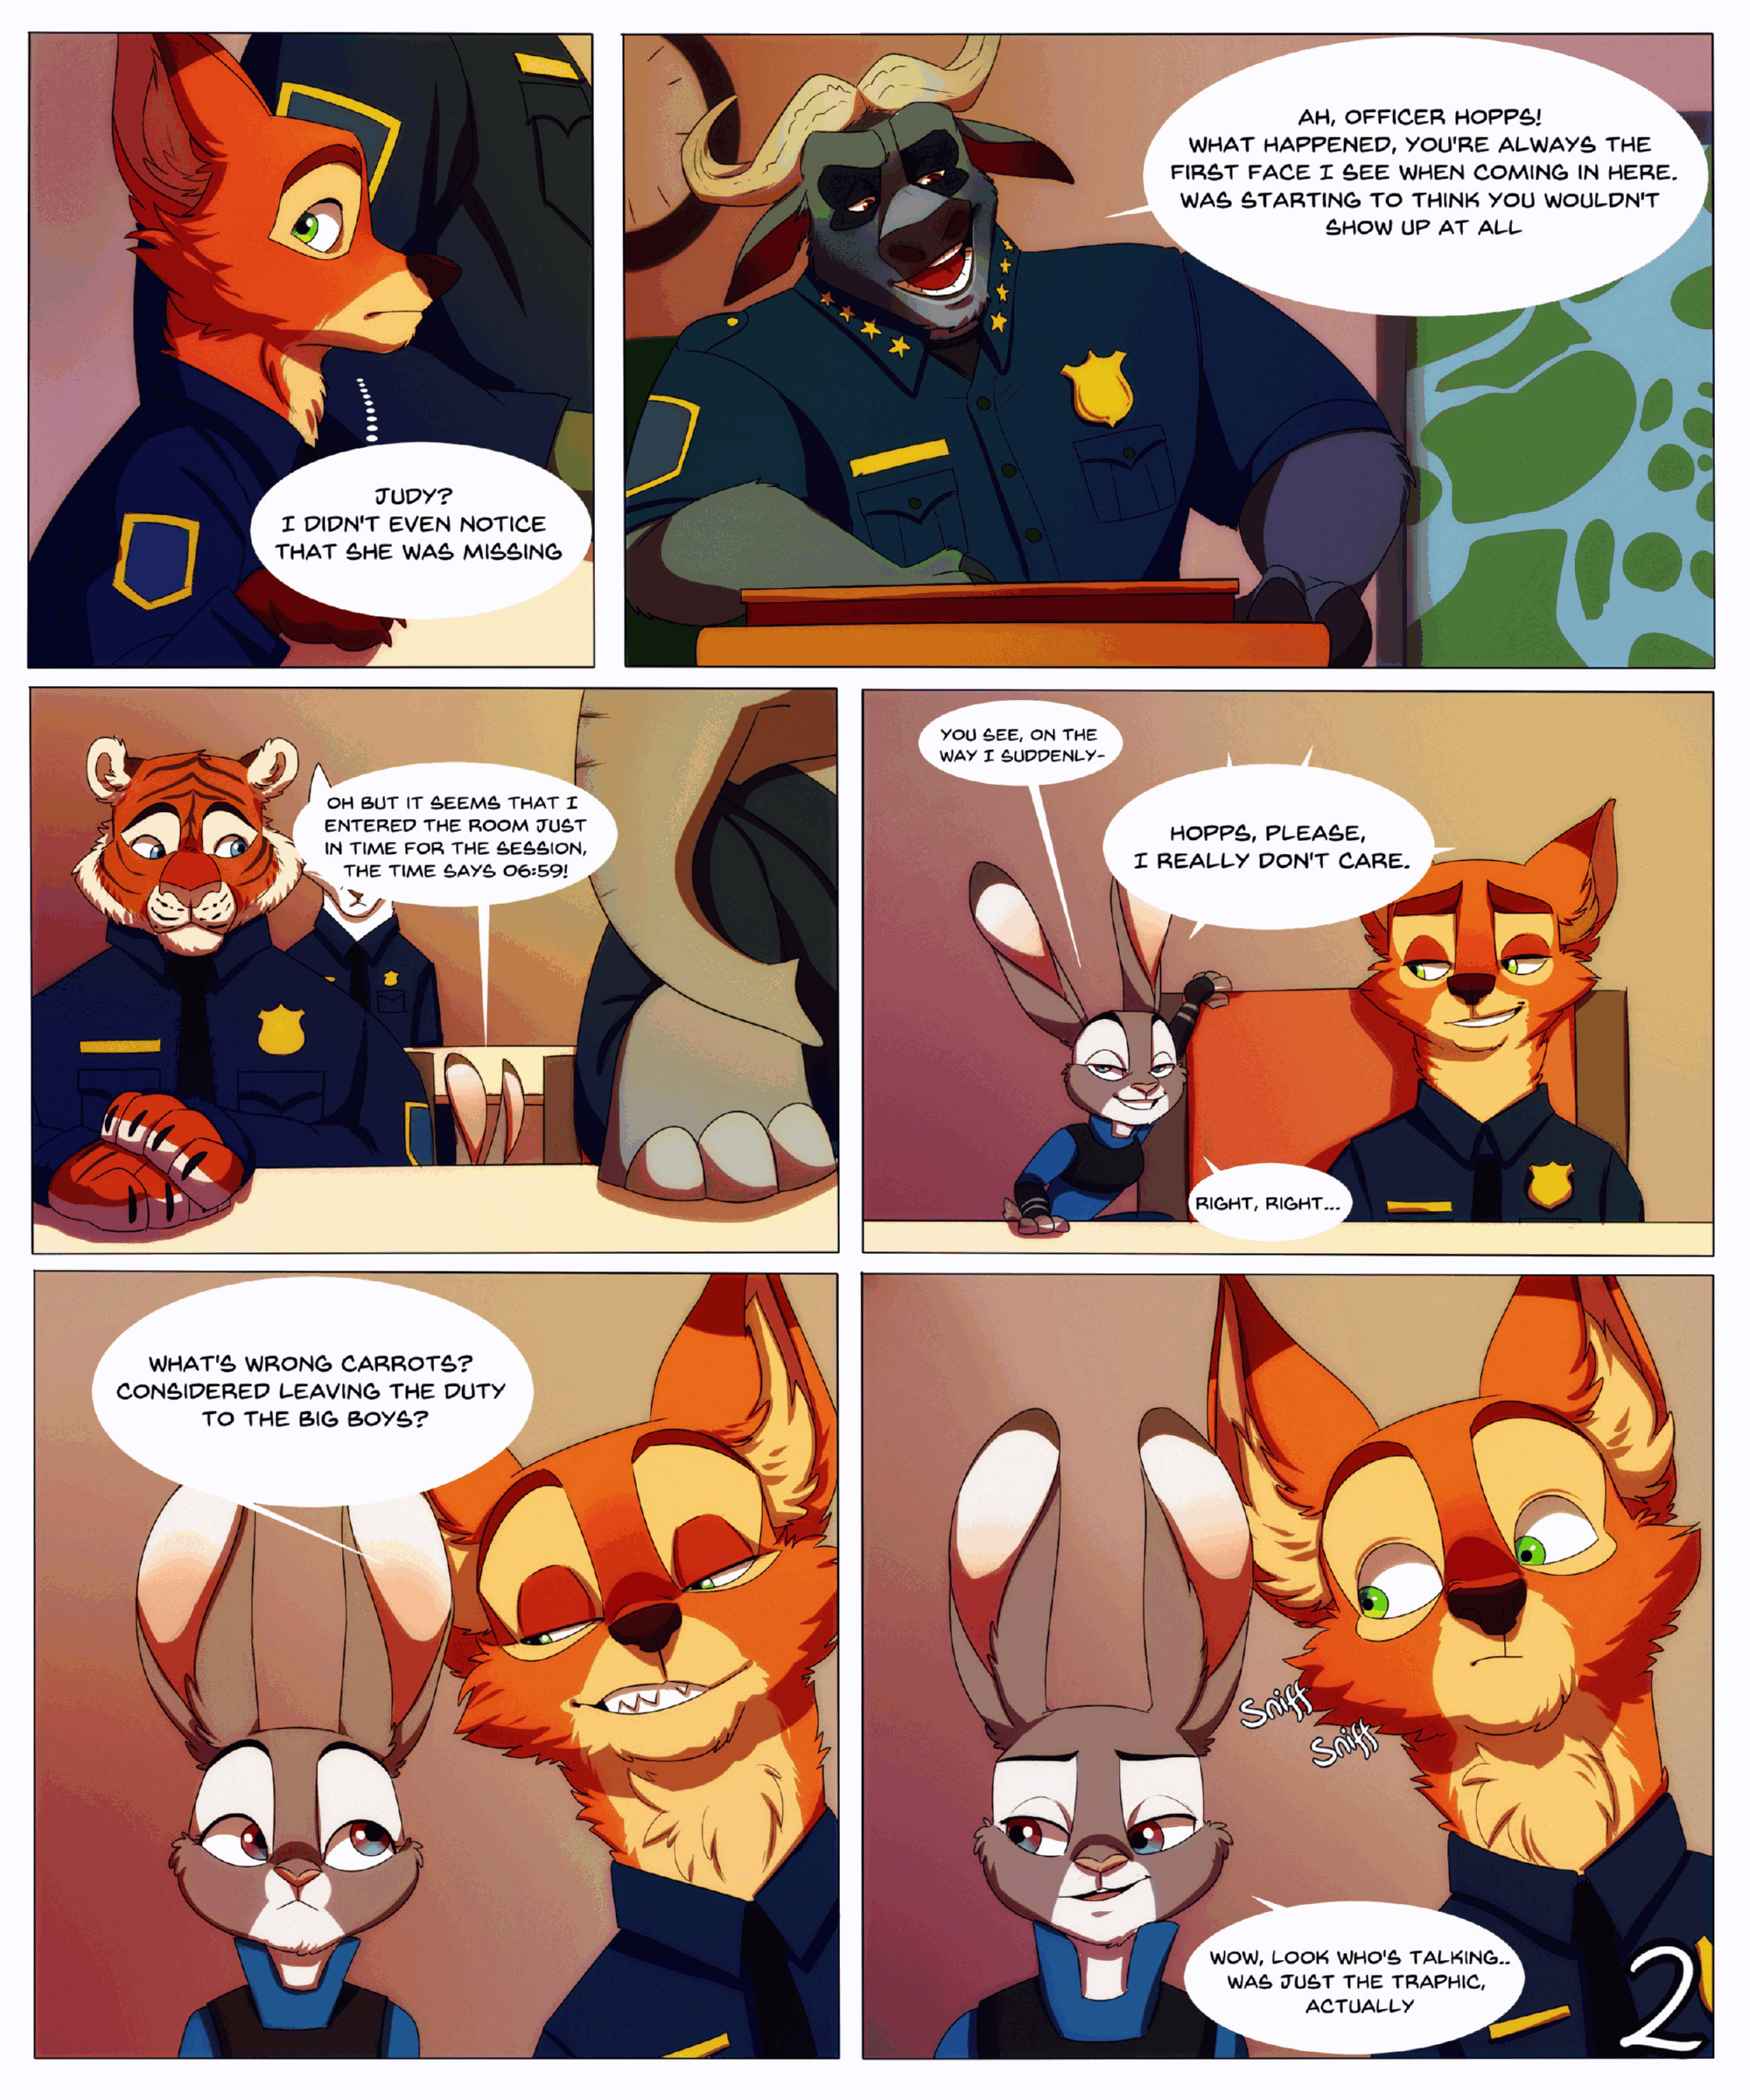 Furry gay porn comic twitteredpatted